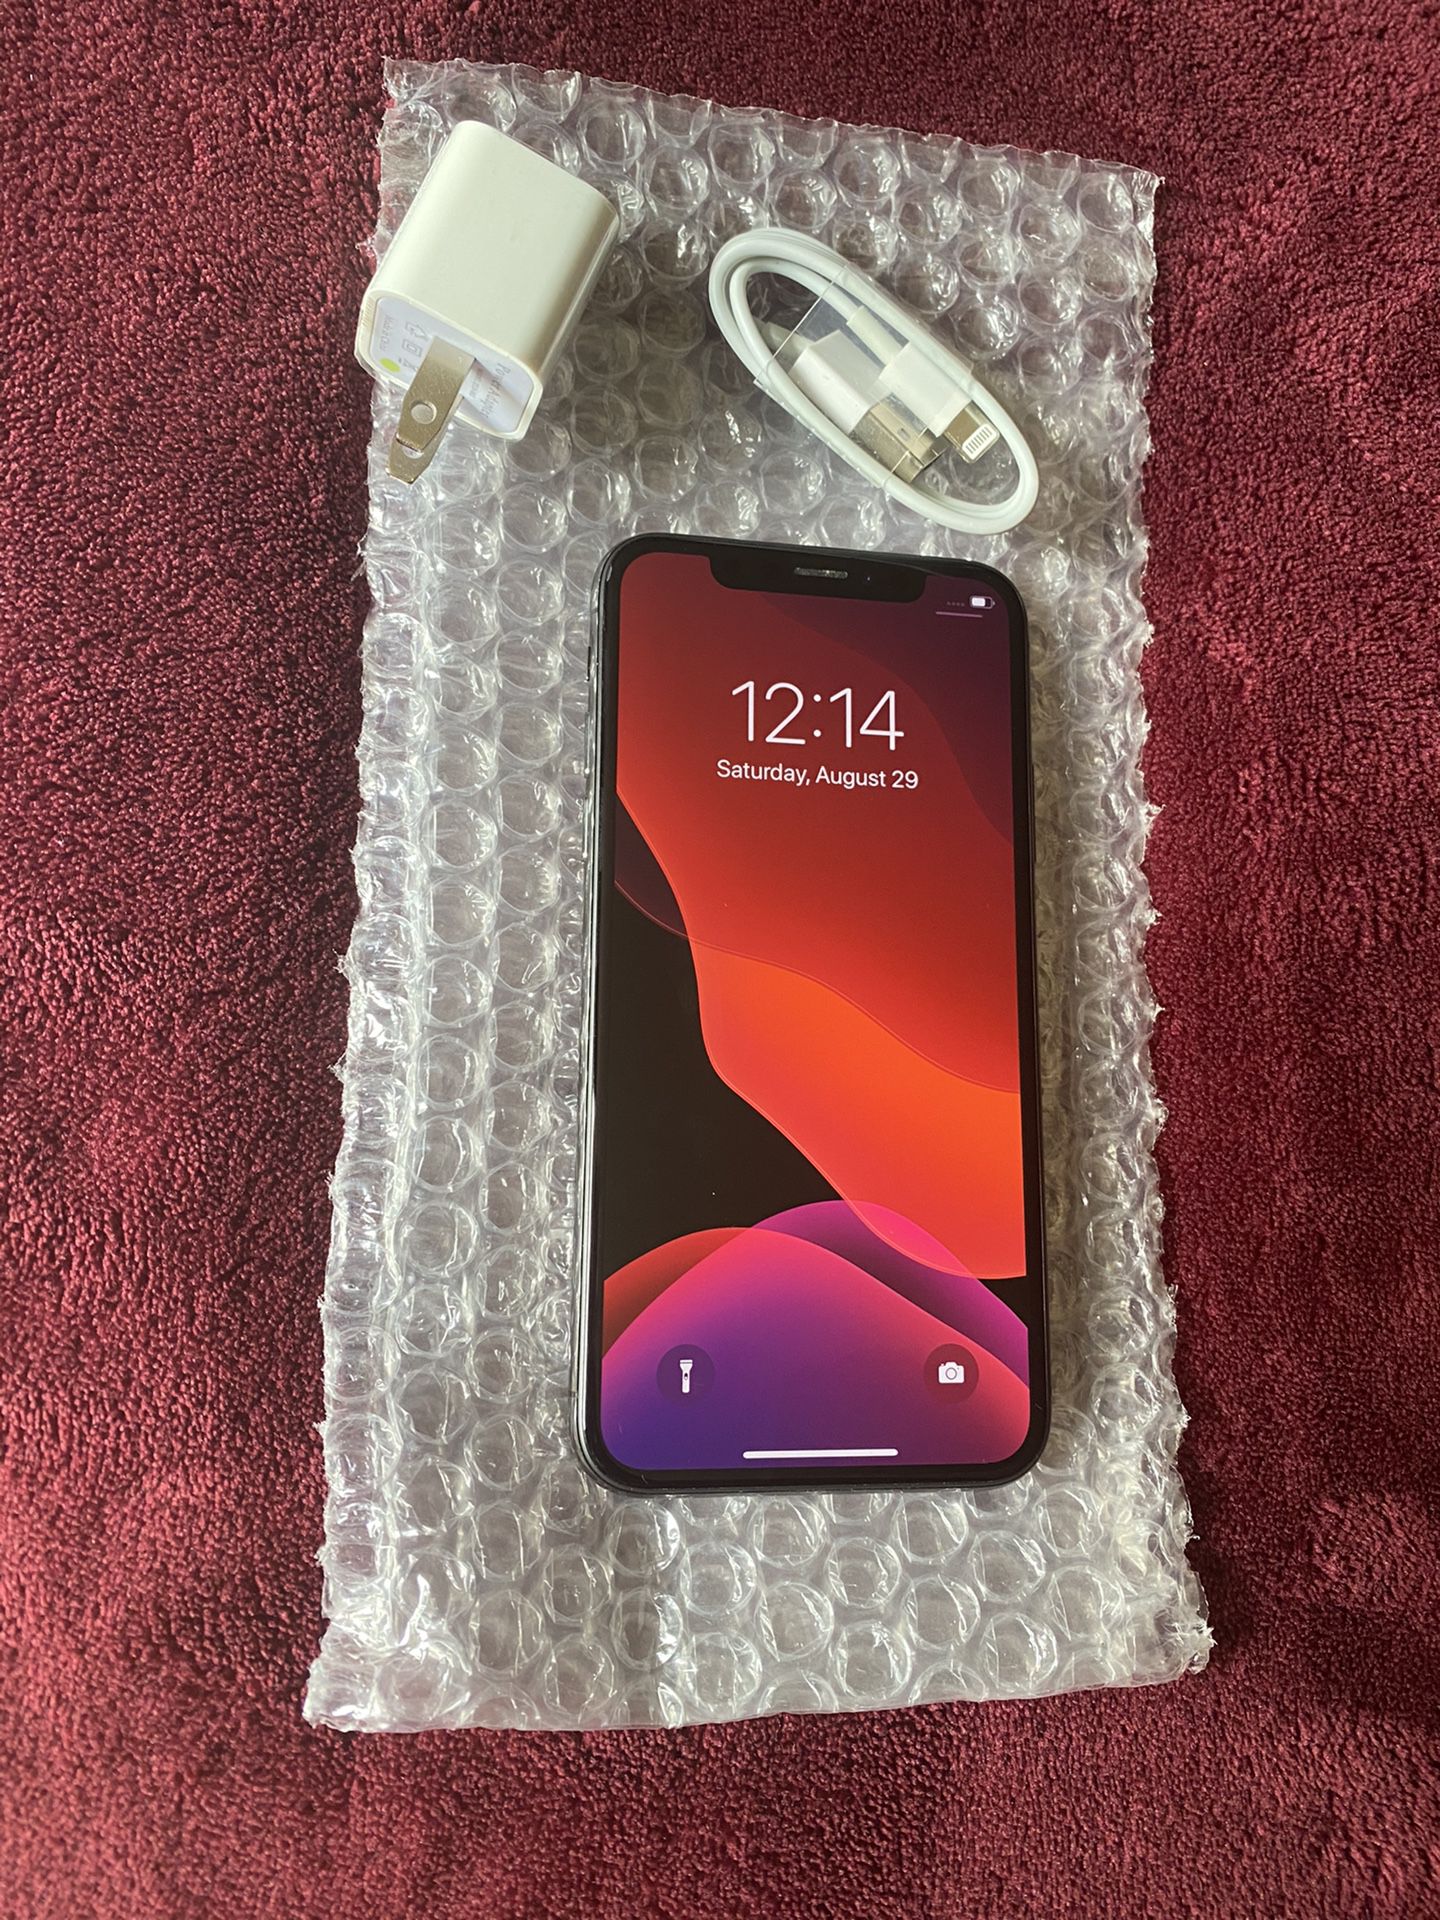 iPhone X 64gb AT&T or Cricket